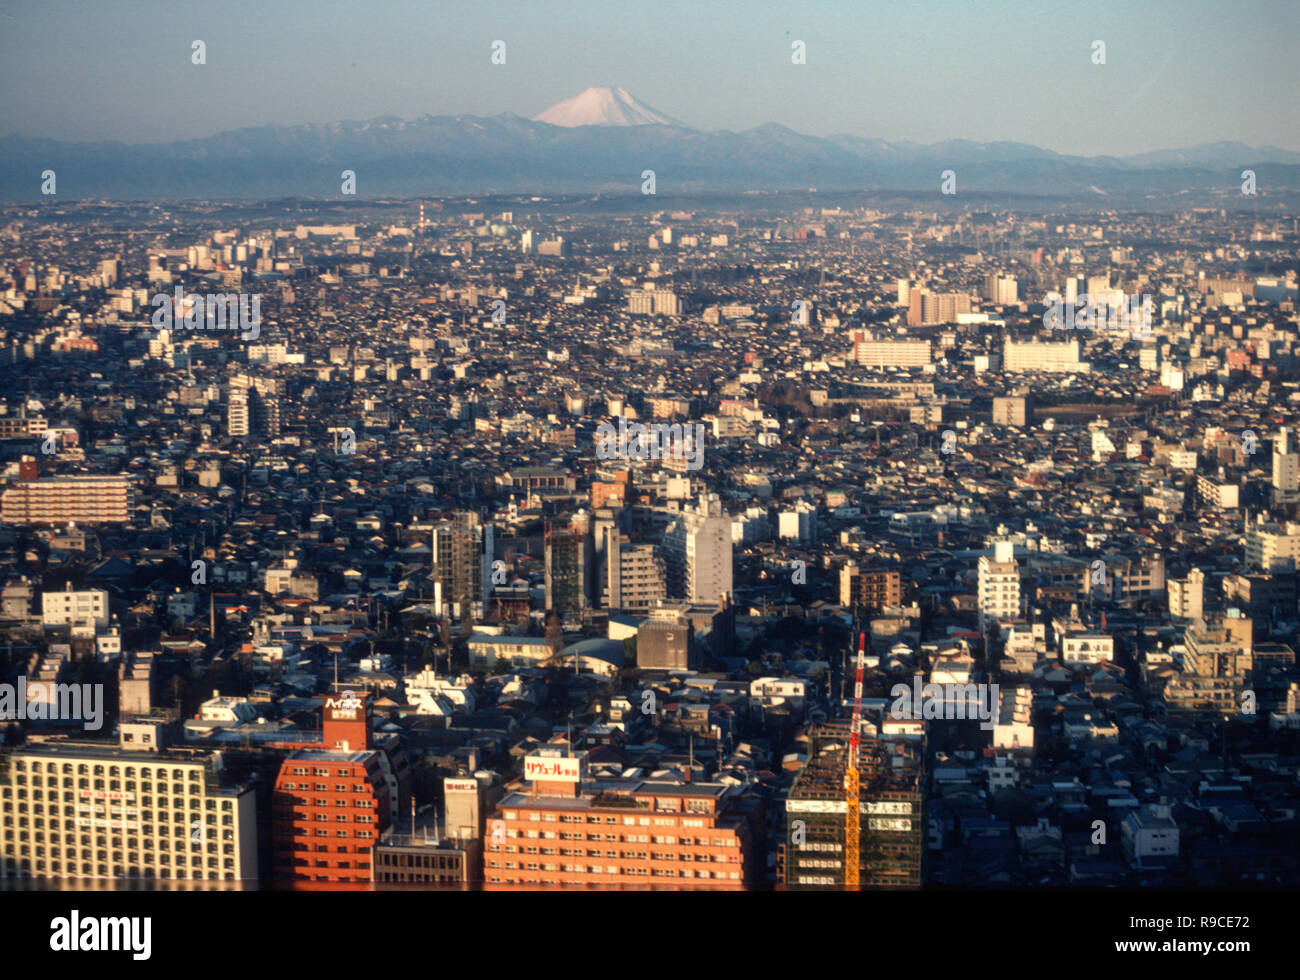 Mount Fuji is scene in the distance over a city neighborhood in Tokyo, Japan Stock Photo